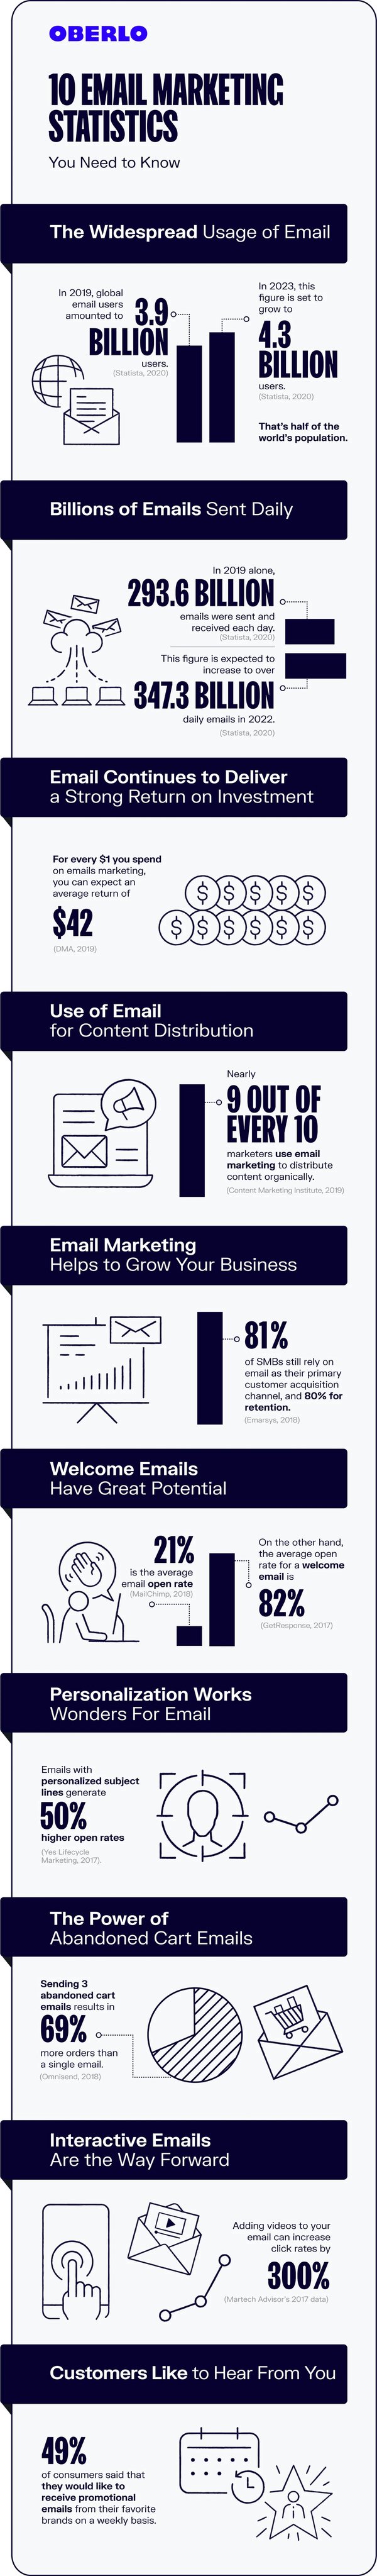 why mobile marketing matters for email marketing campaigns - infographic